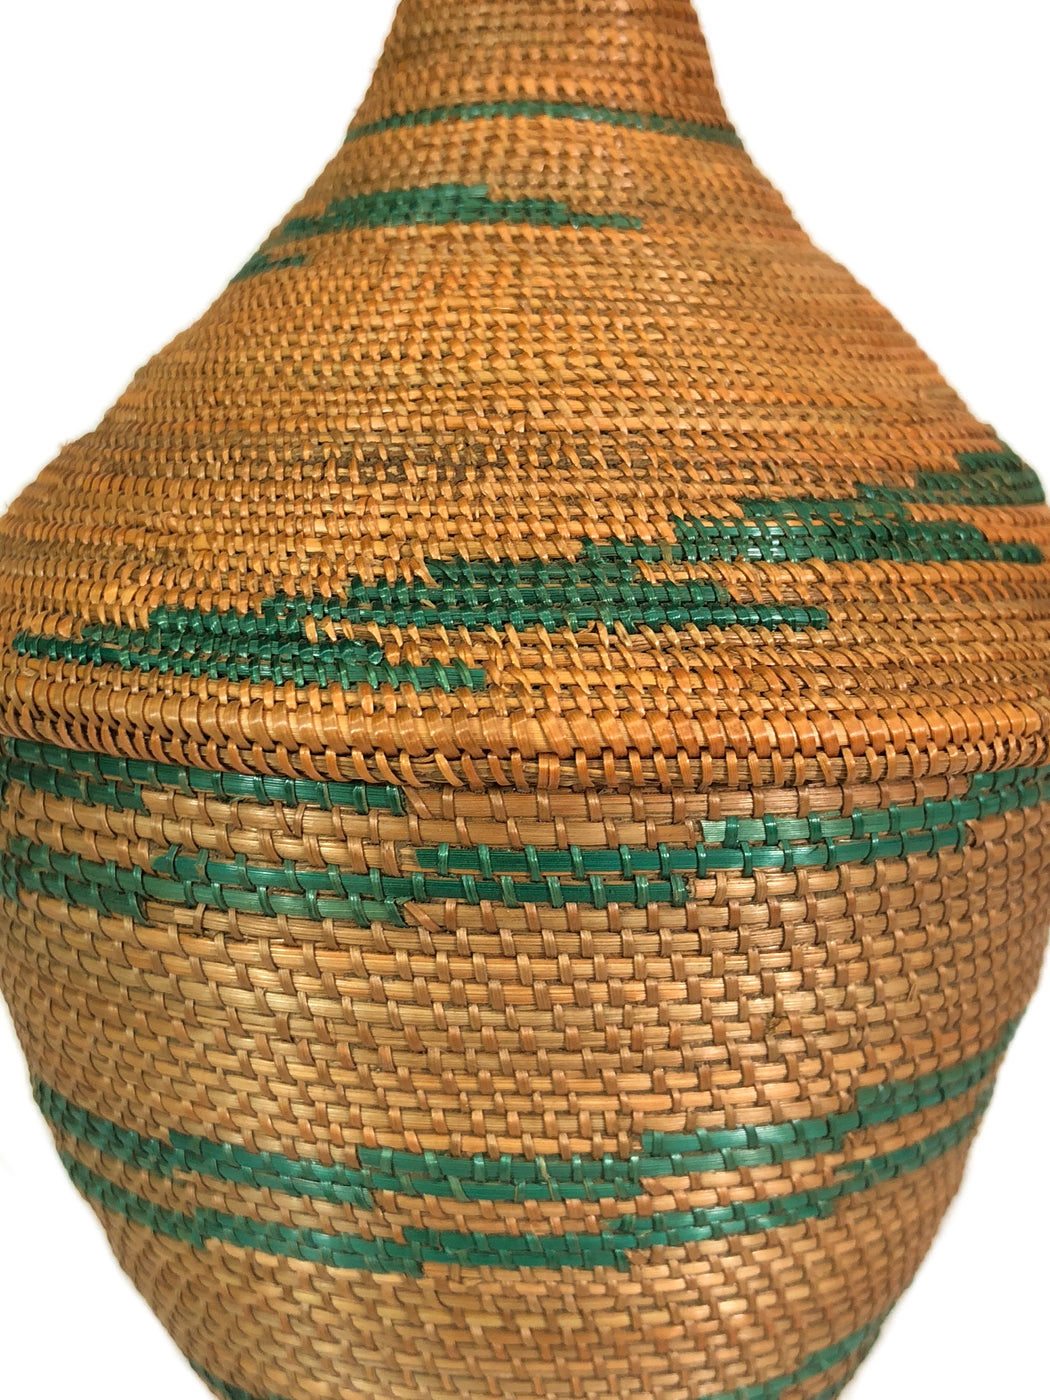 Small Vintage Tutsi Decor Basket with Green Accents - 7" x 4" - Niger Bend